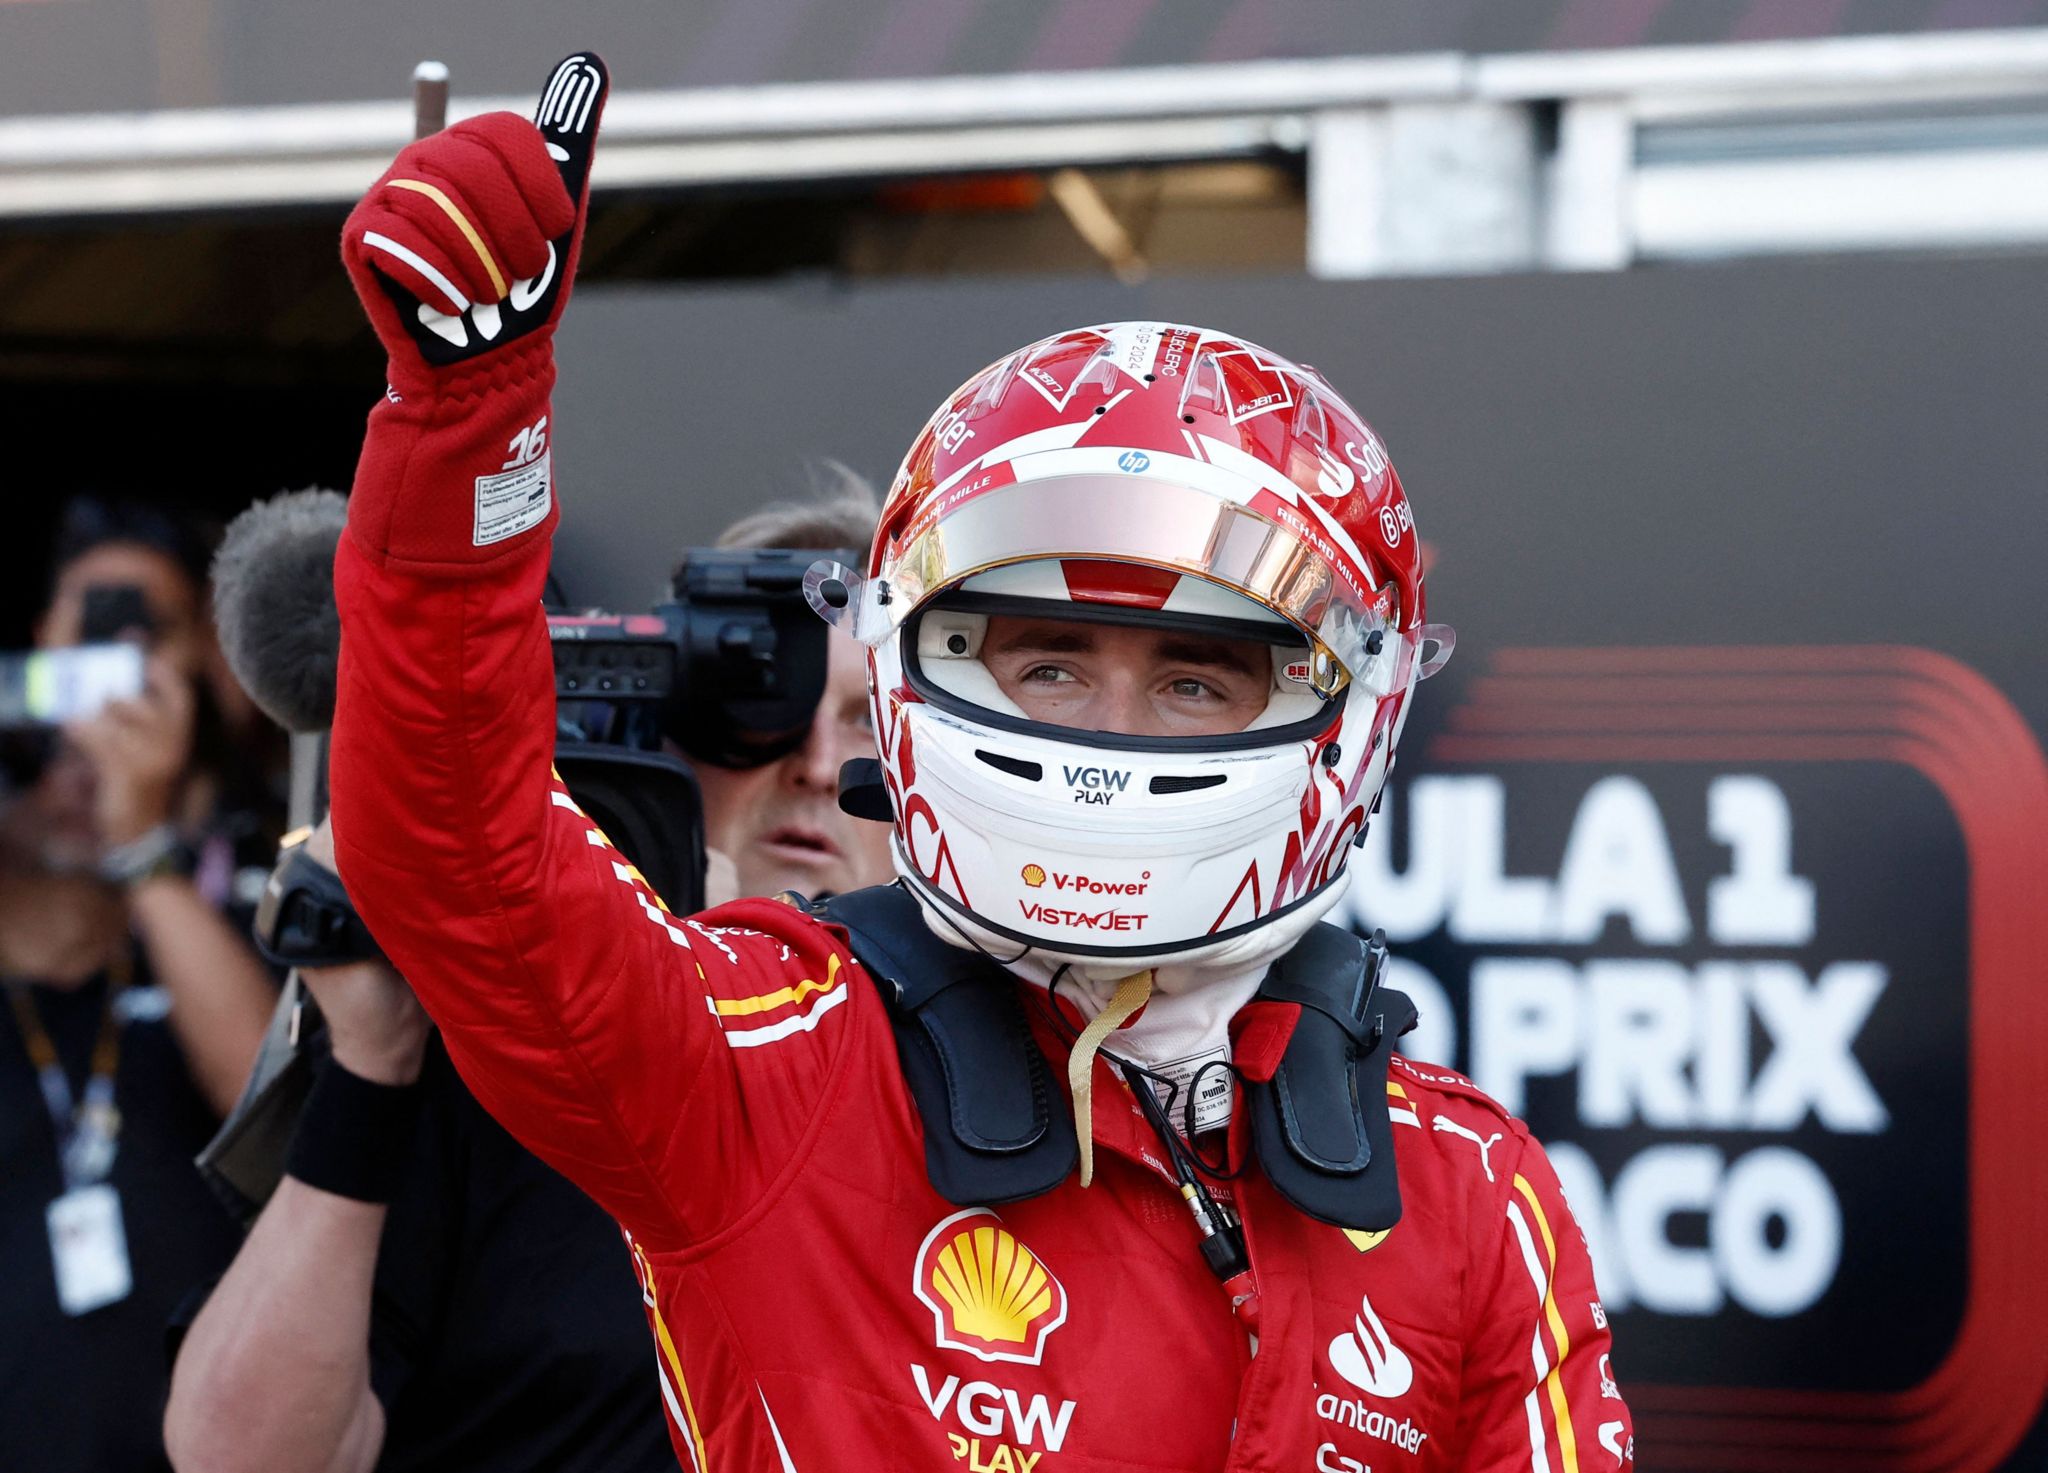 Monaco Grand Prix: Leclerc's F1 Victory, a Tale of Loss and Redemption